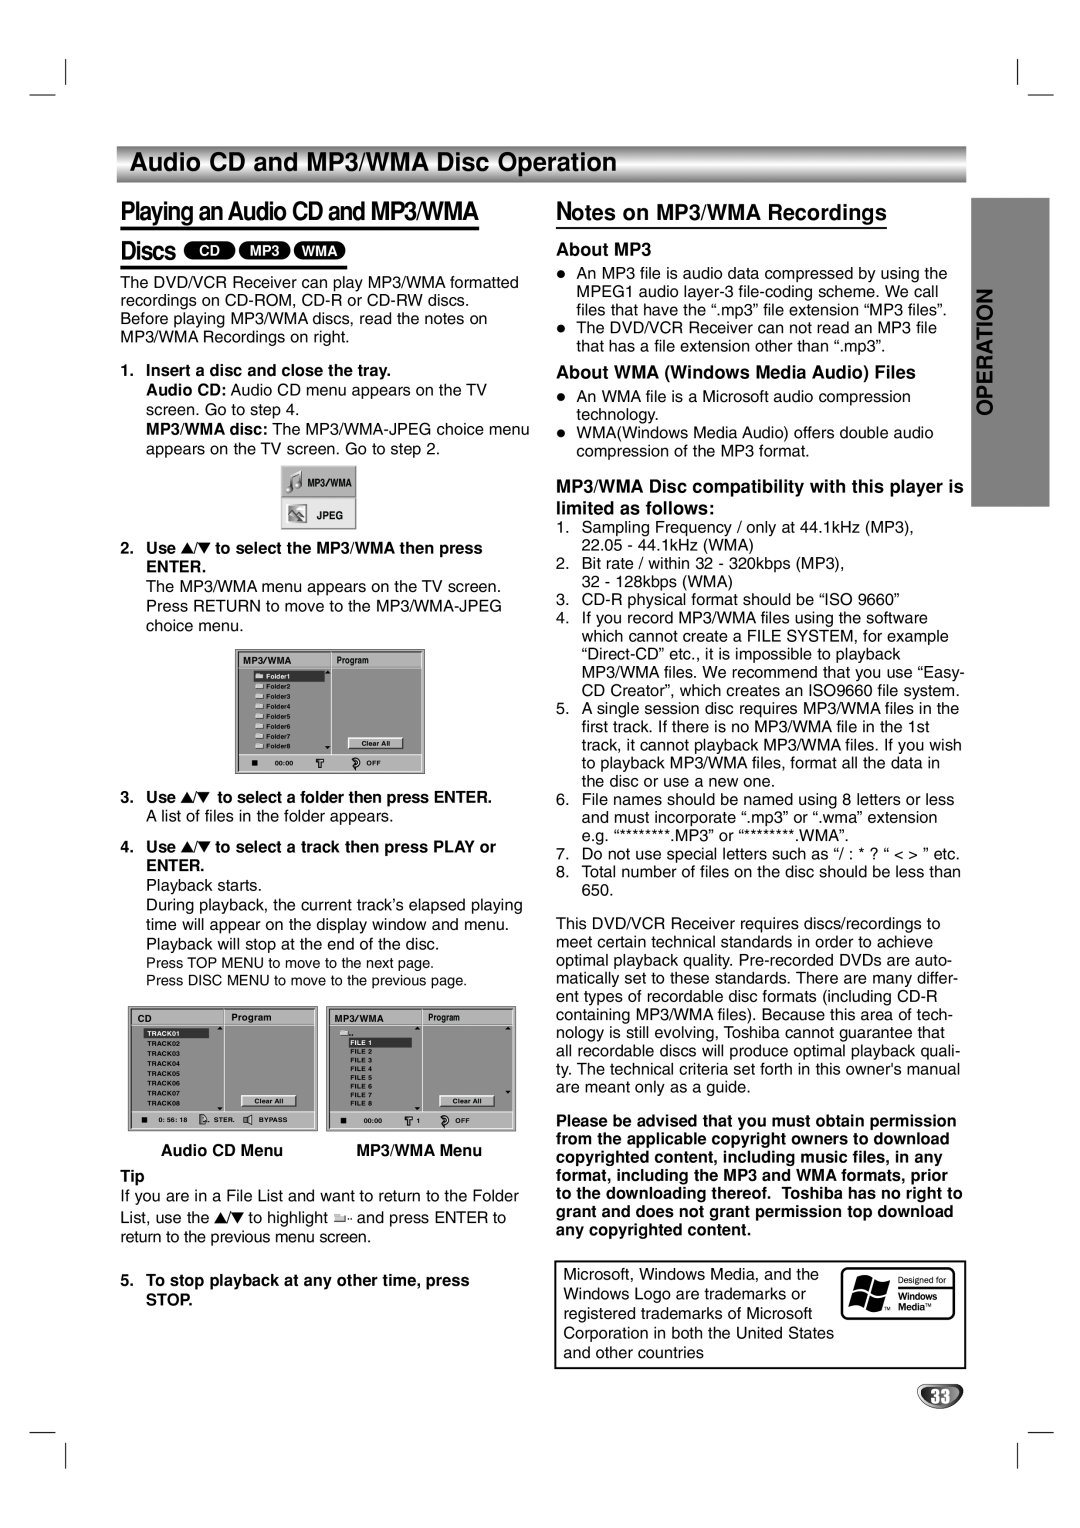 Toshiba SD-V57HTSU owner manual Audio CD and MP3/WMA Disc Operation, Notes on MP3/WMA Recordings, About MP3 